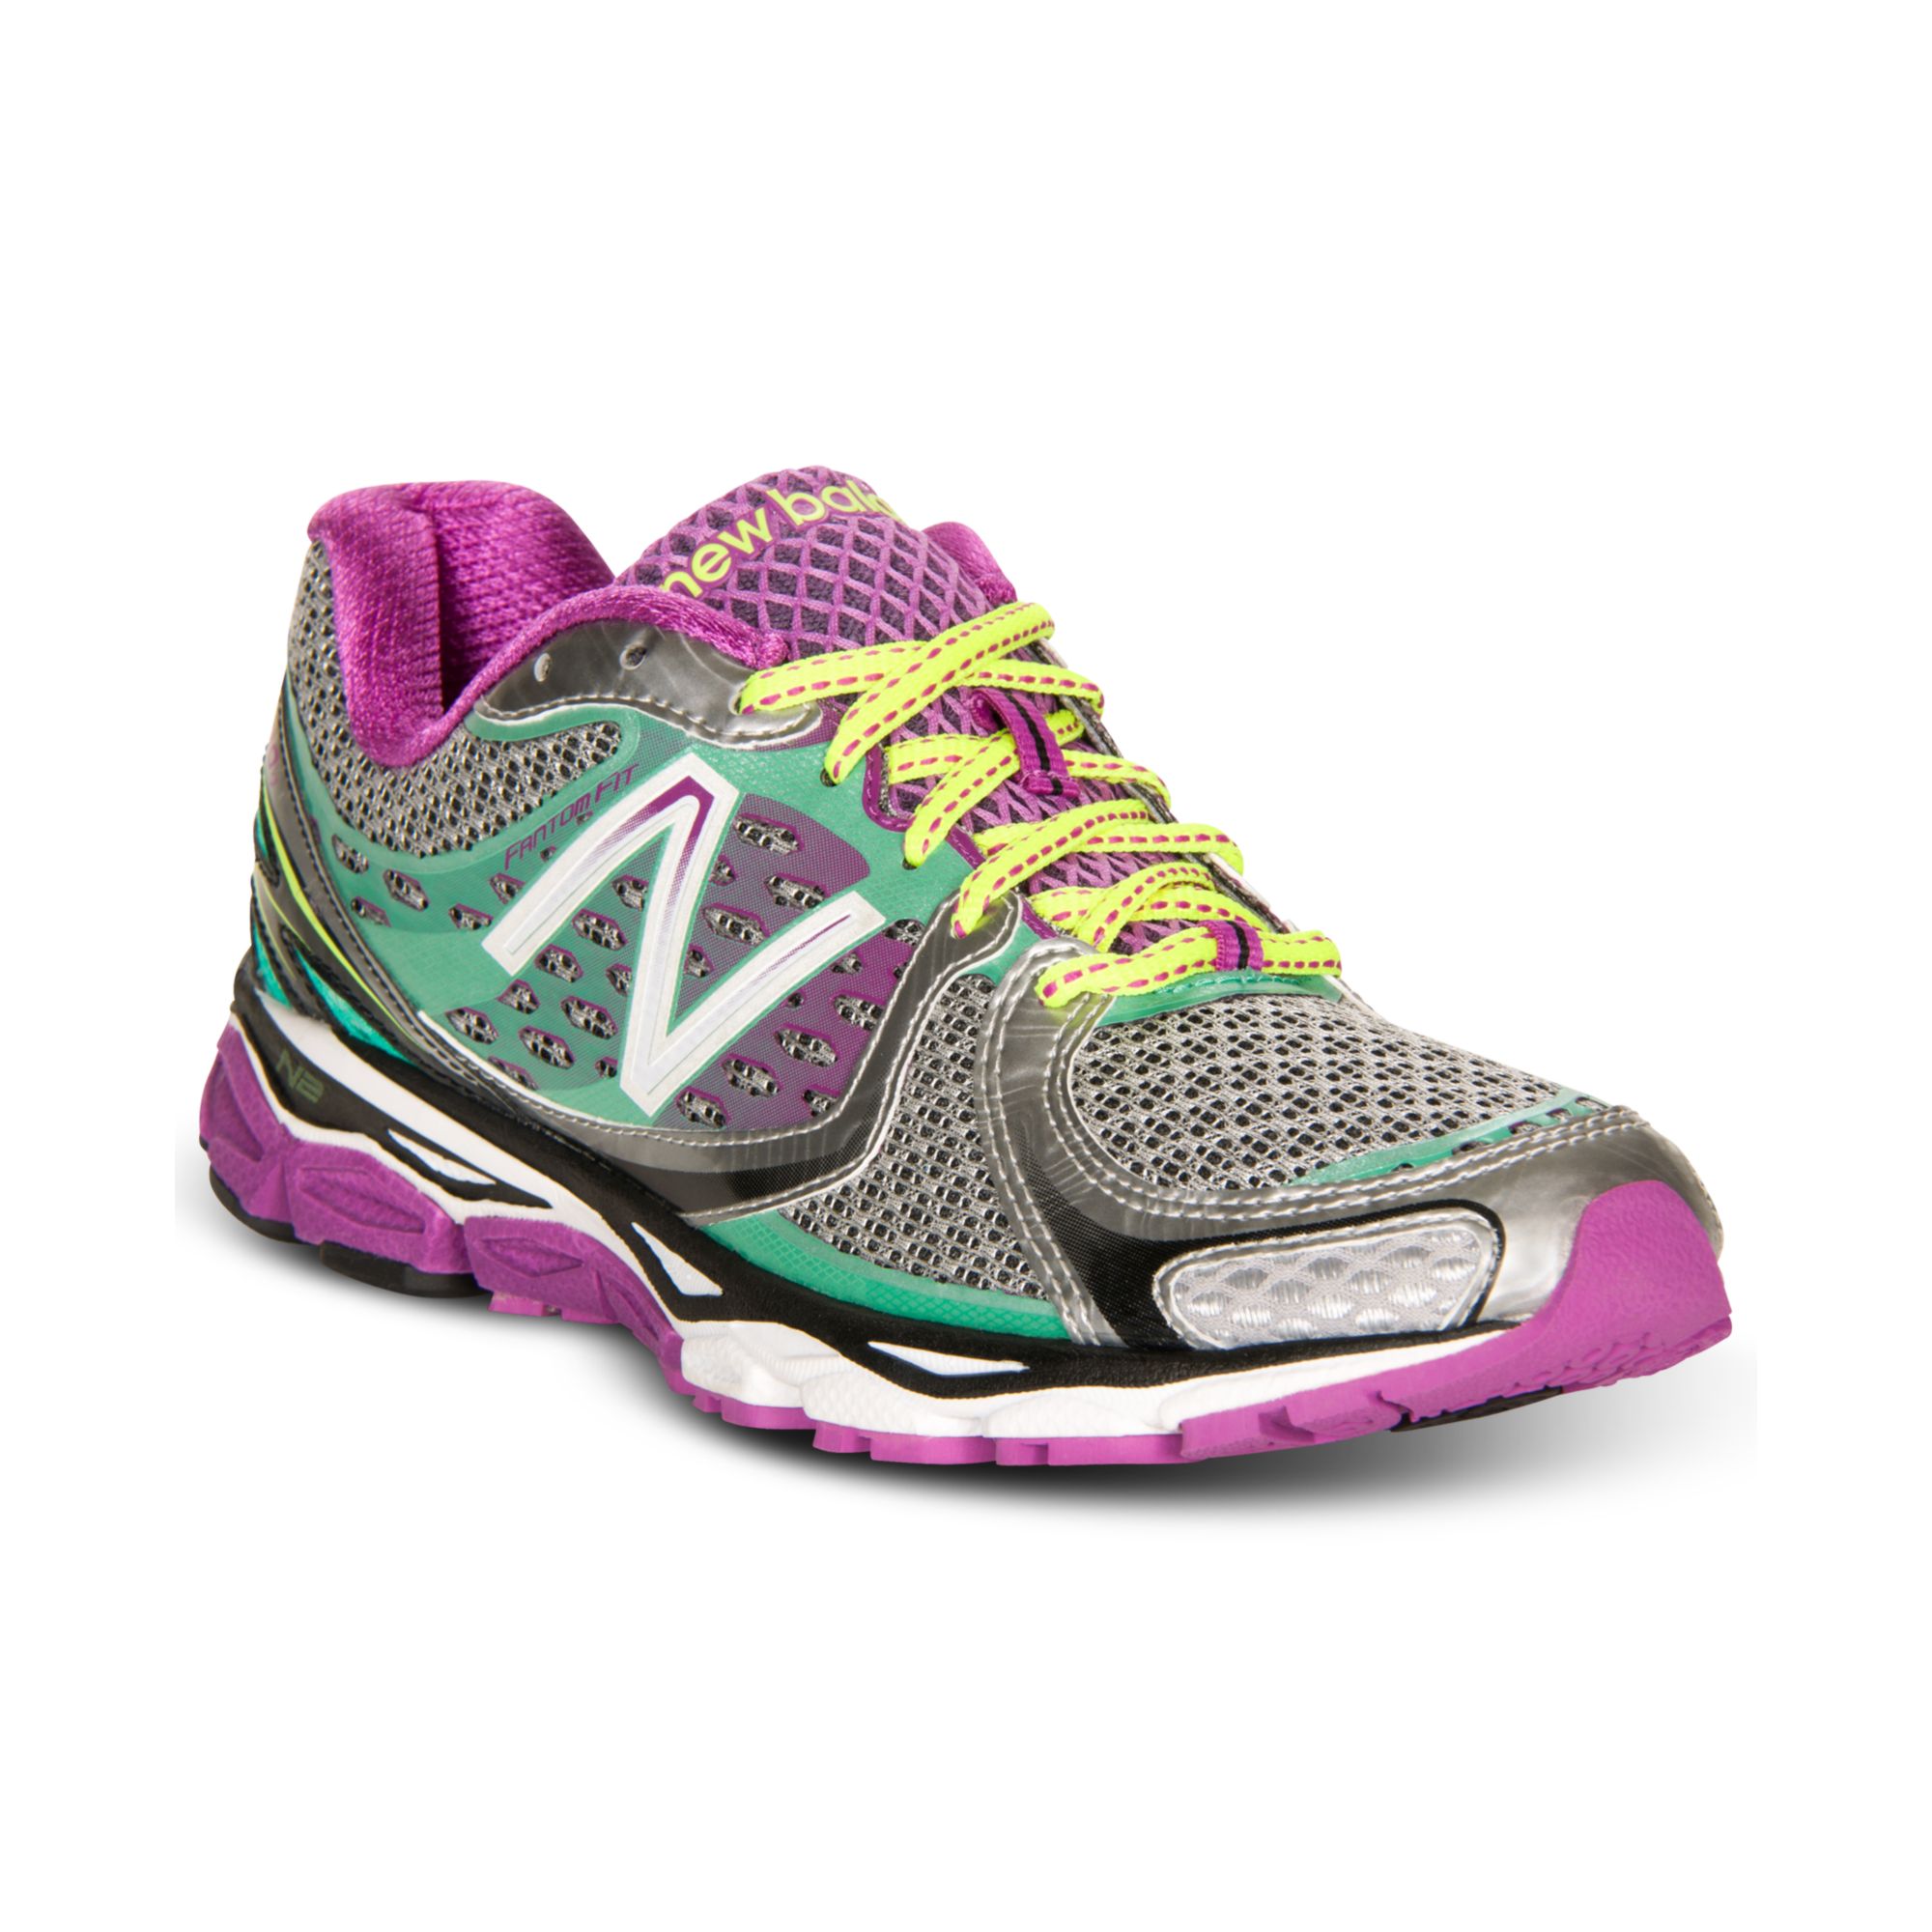 New Balance Running Sneakers in Multicolor (SILVER/PURPLE